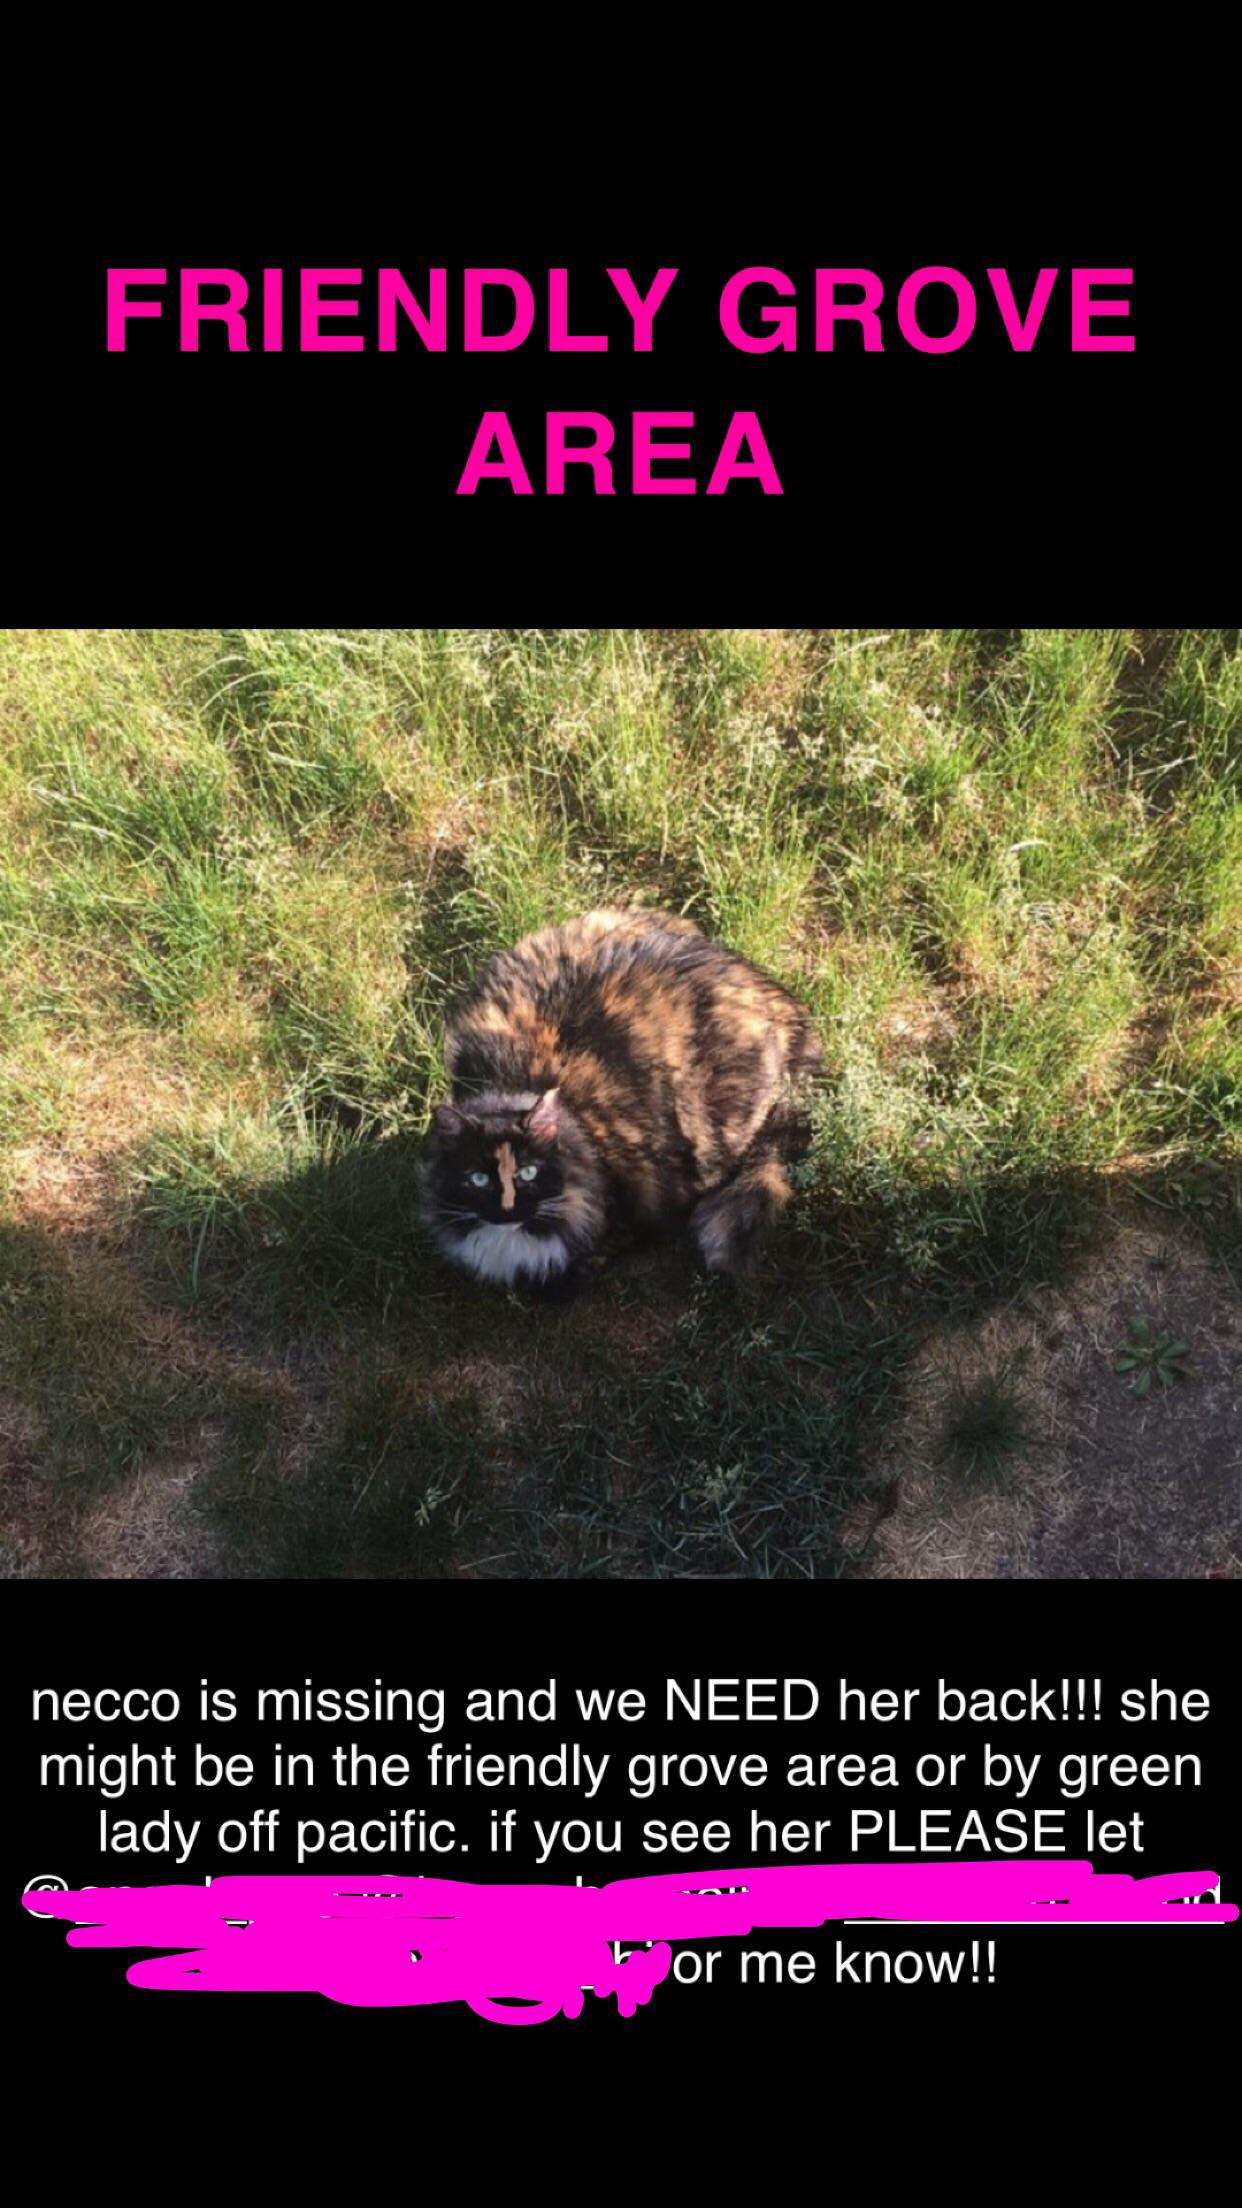 not sure if allowed, but my friends cat has been missing for 4 days now ...